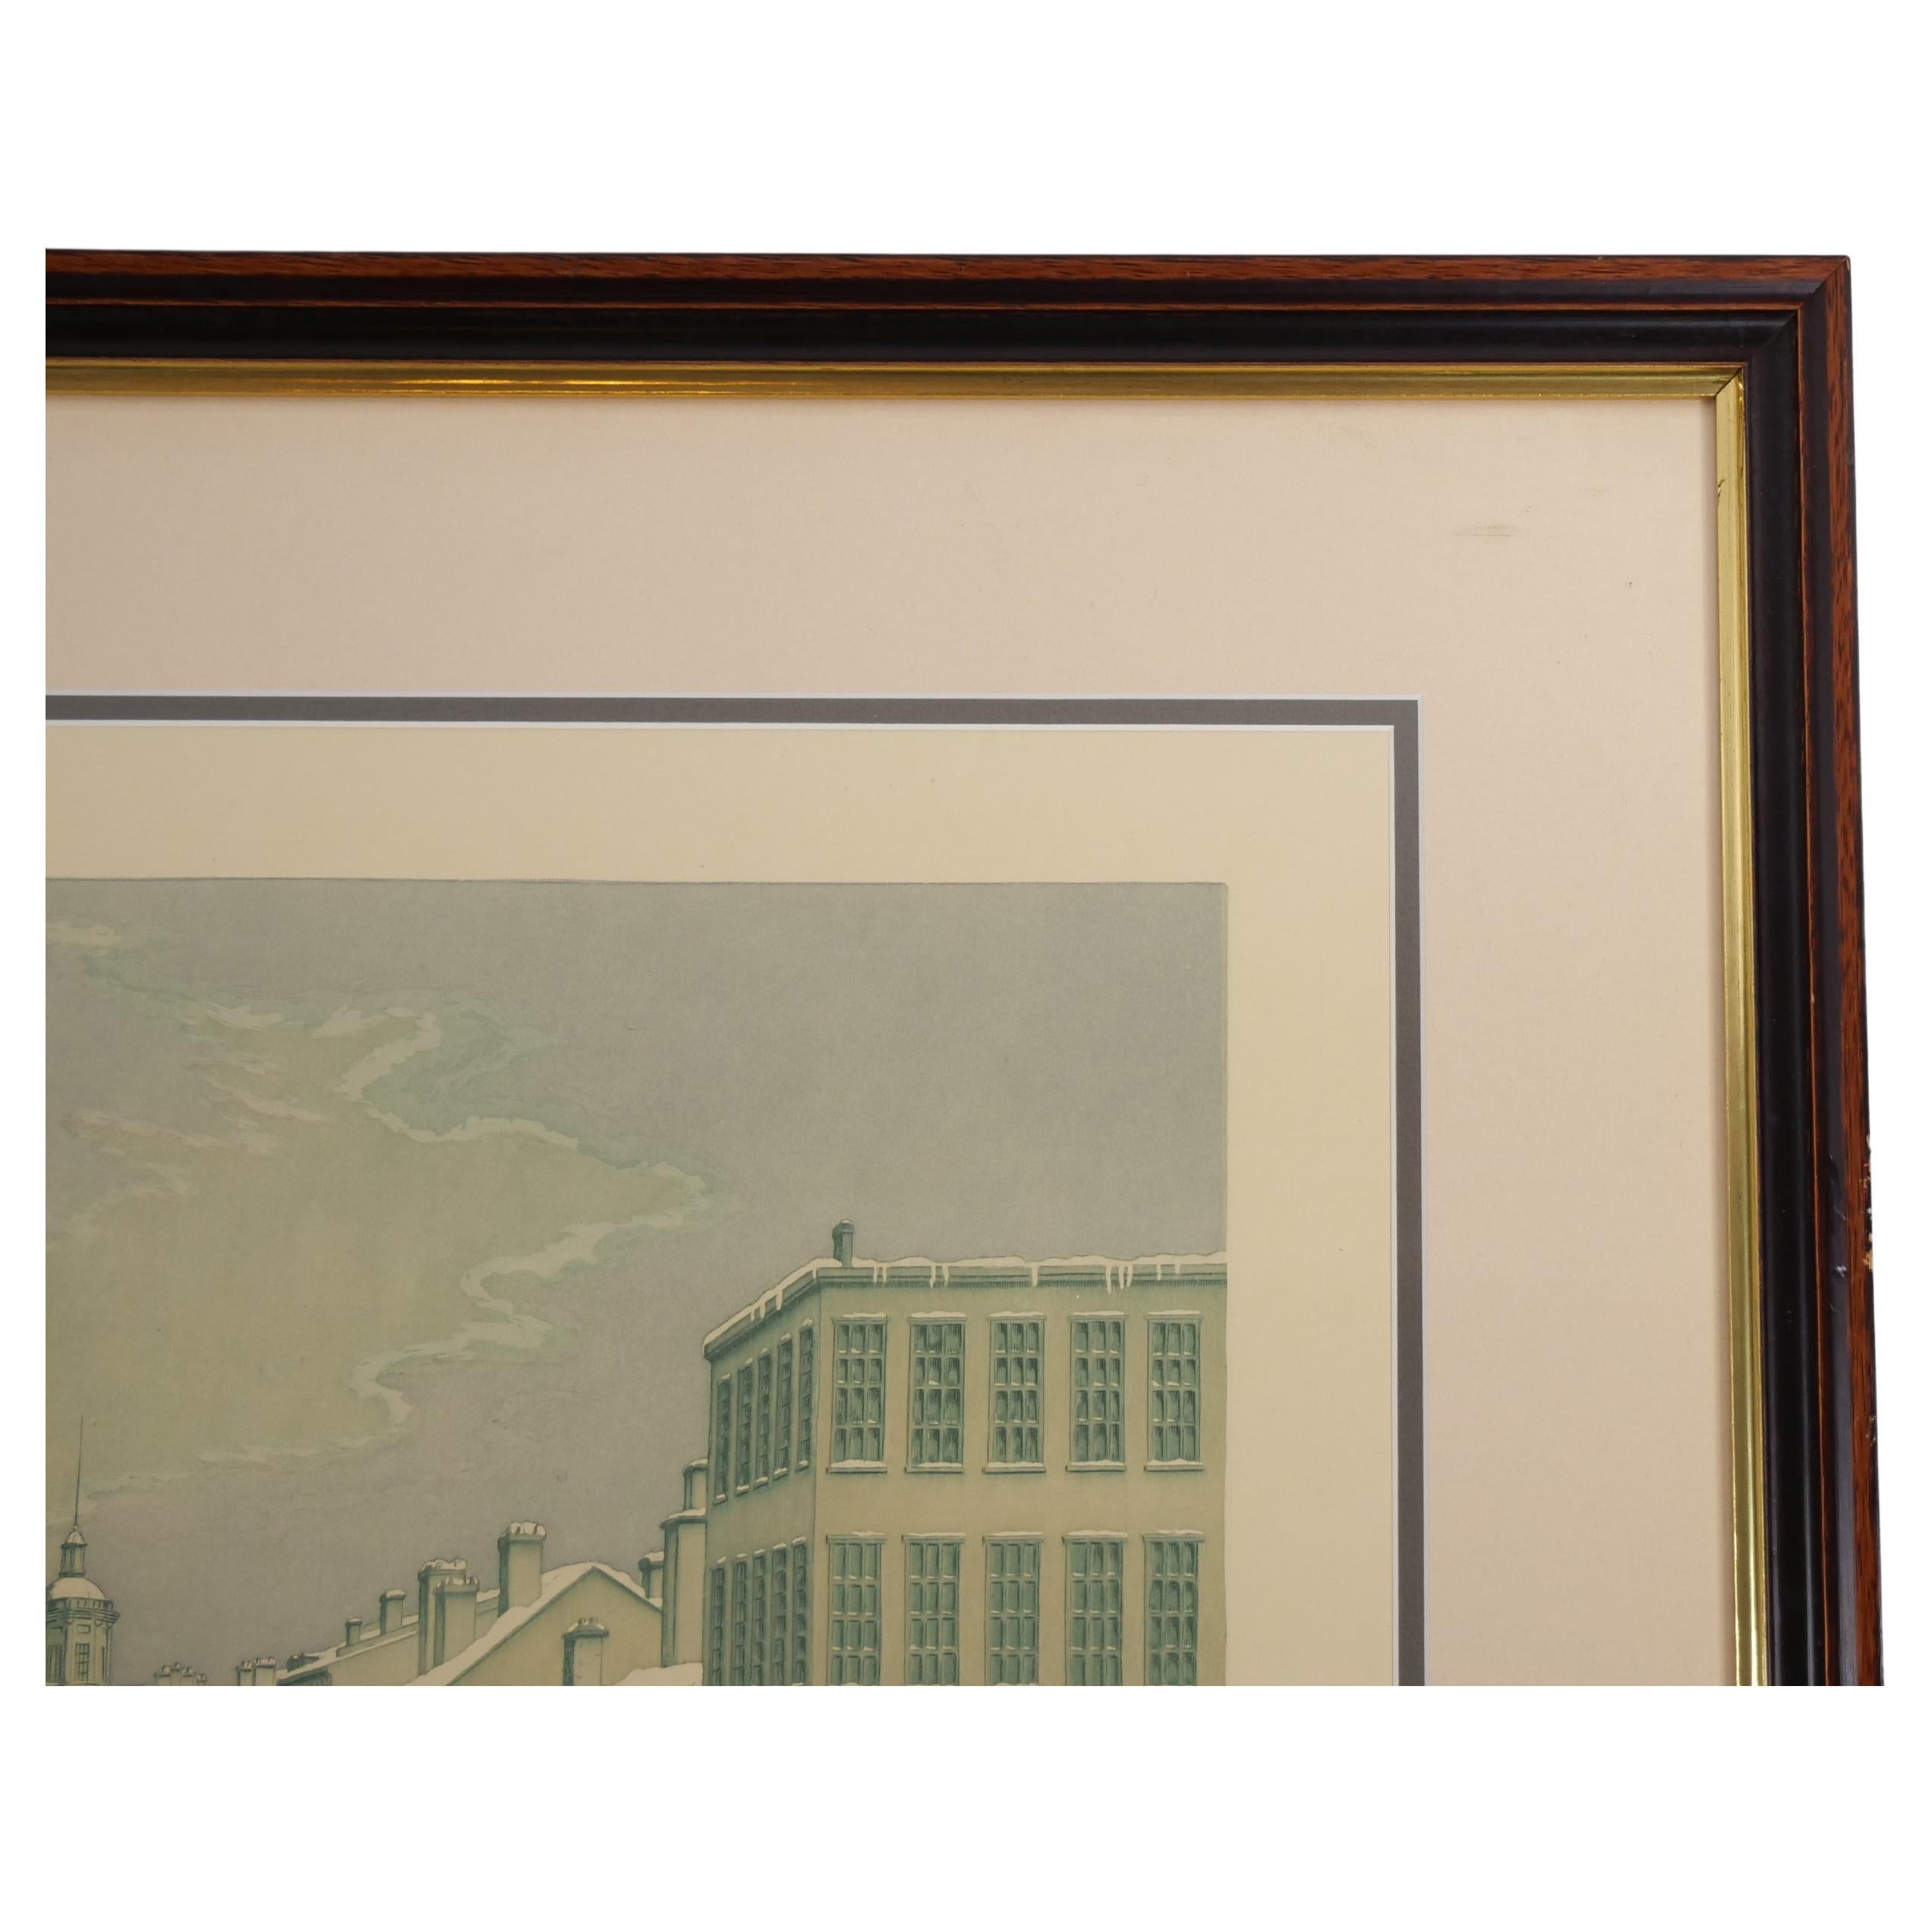 American Wall Street 1834 Framed Aquatint Etching After Raoul Varin (1865-1943) For Sale